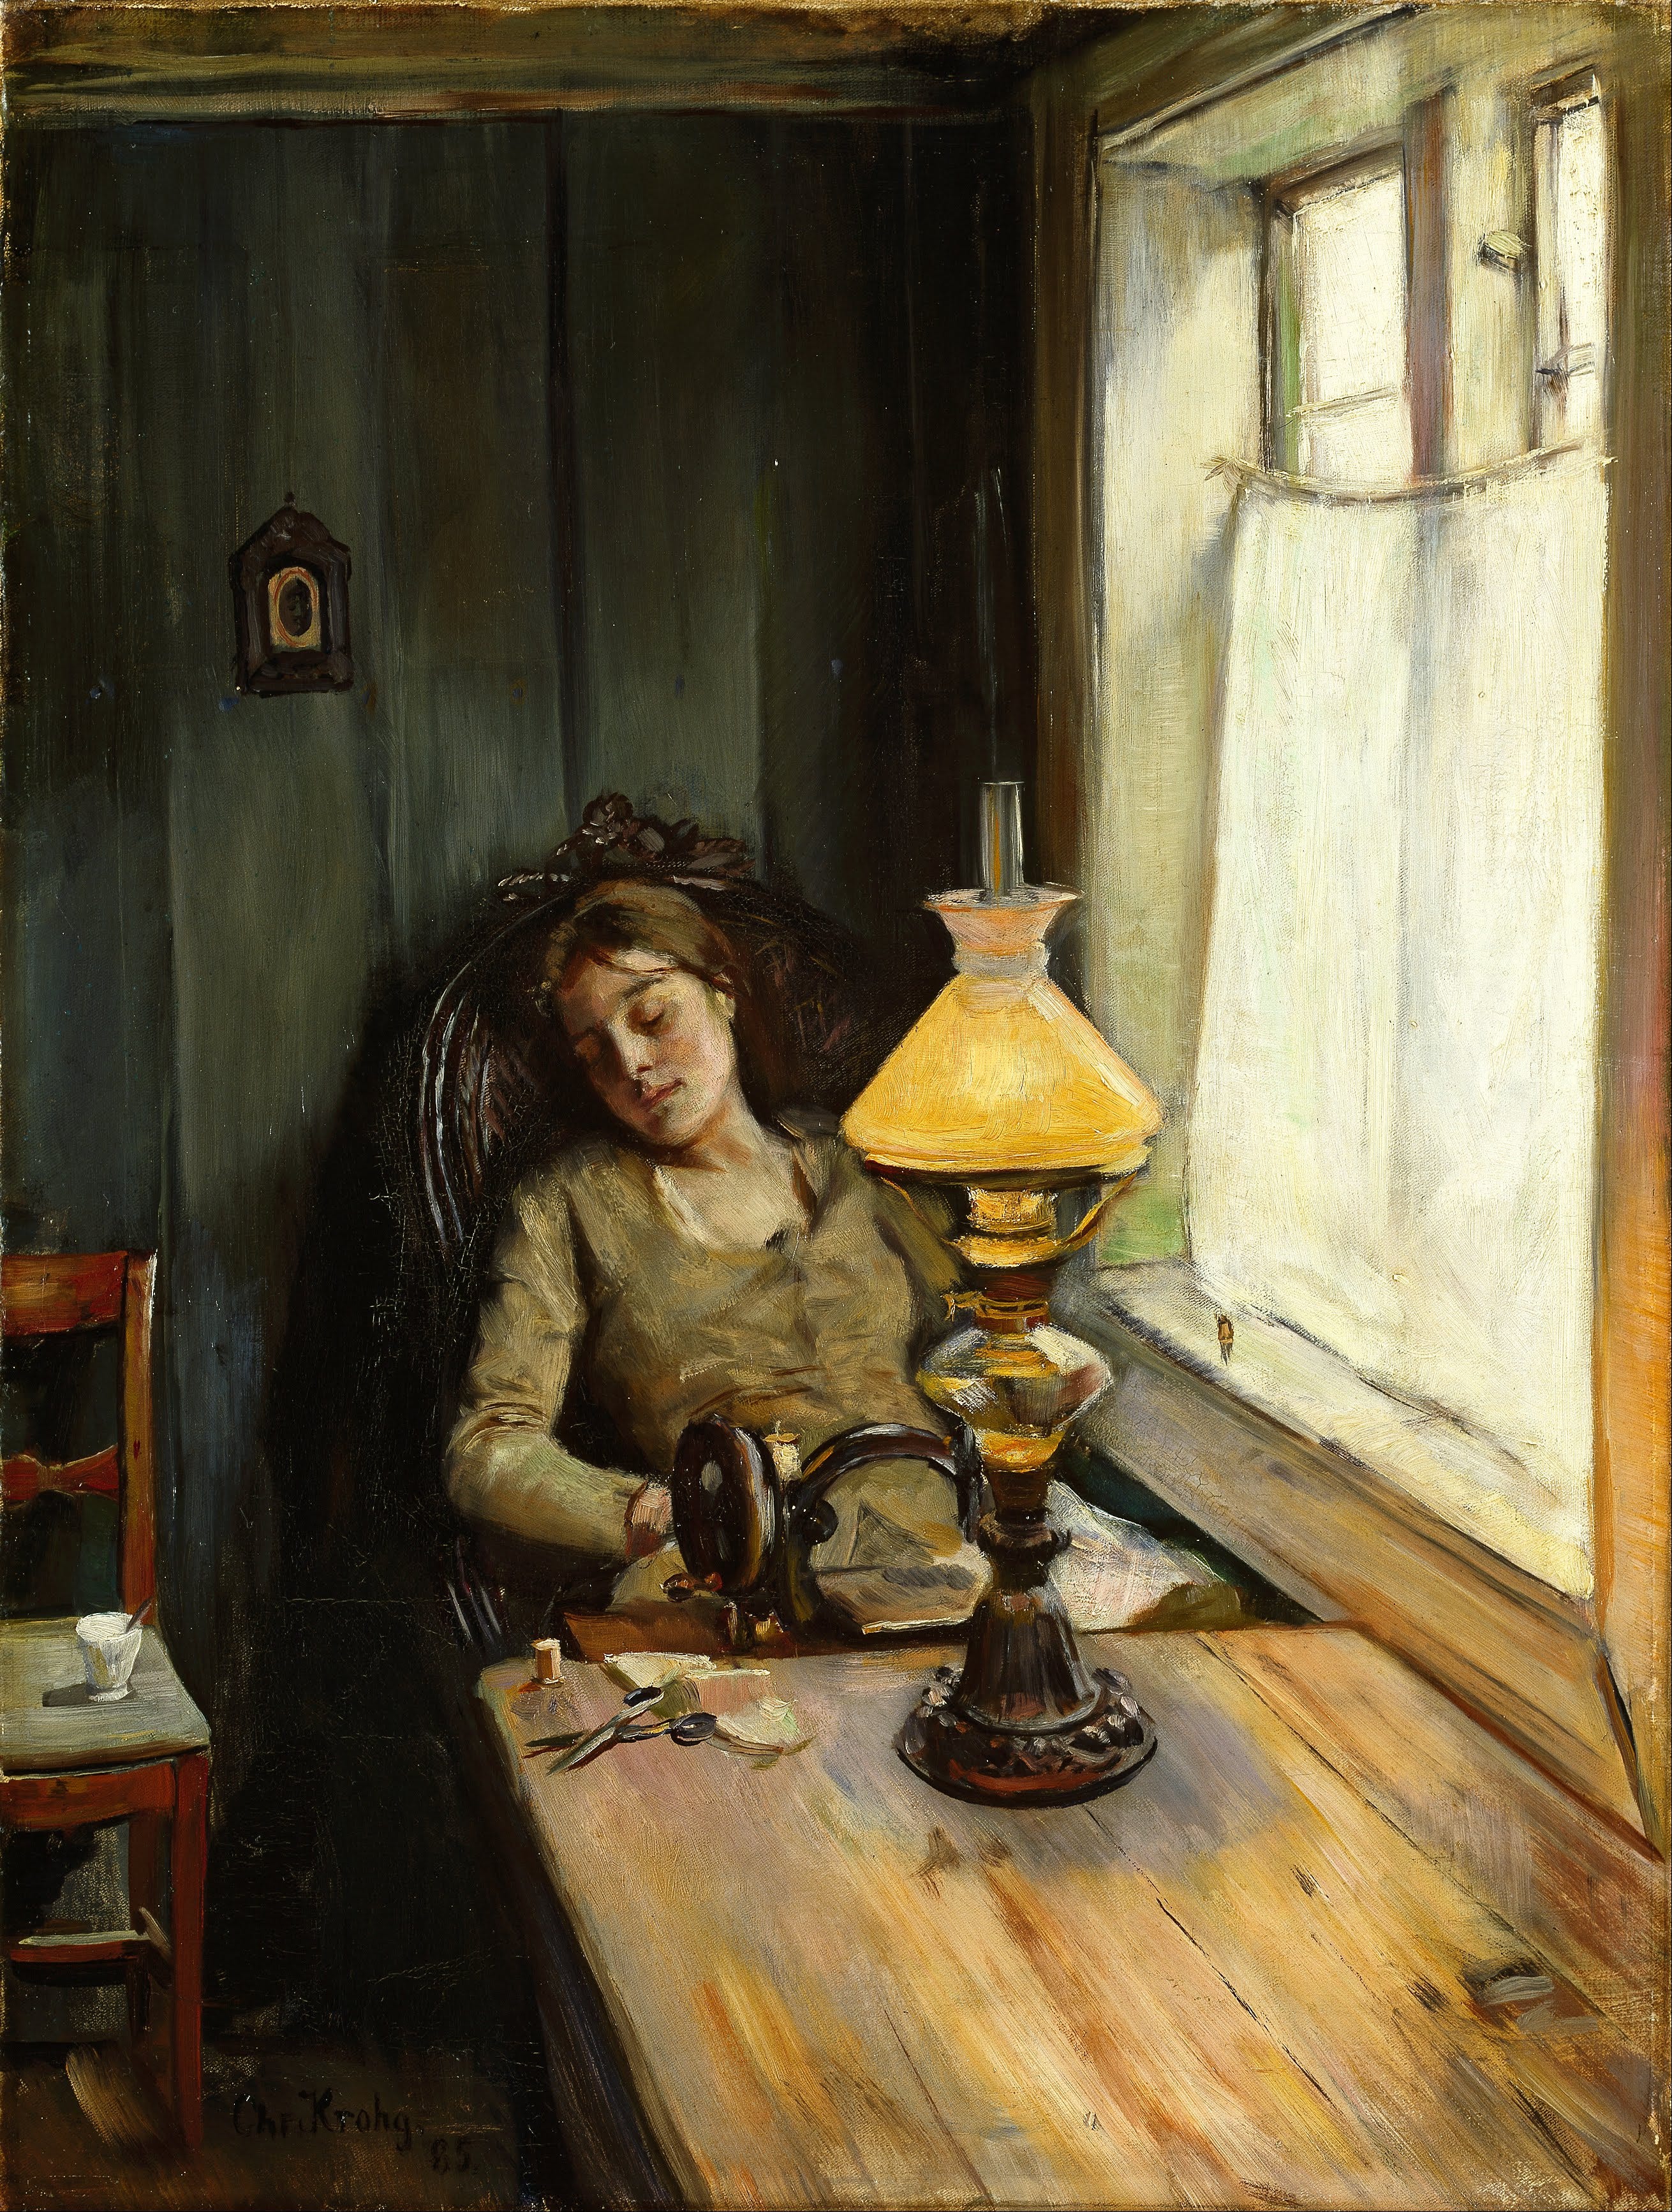 Painting - Tired by Krohg